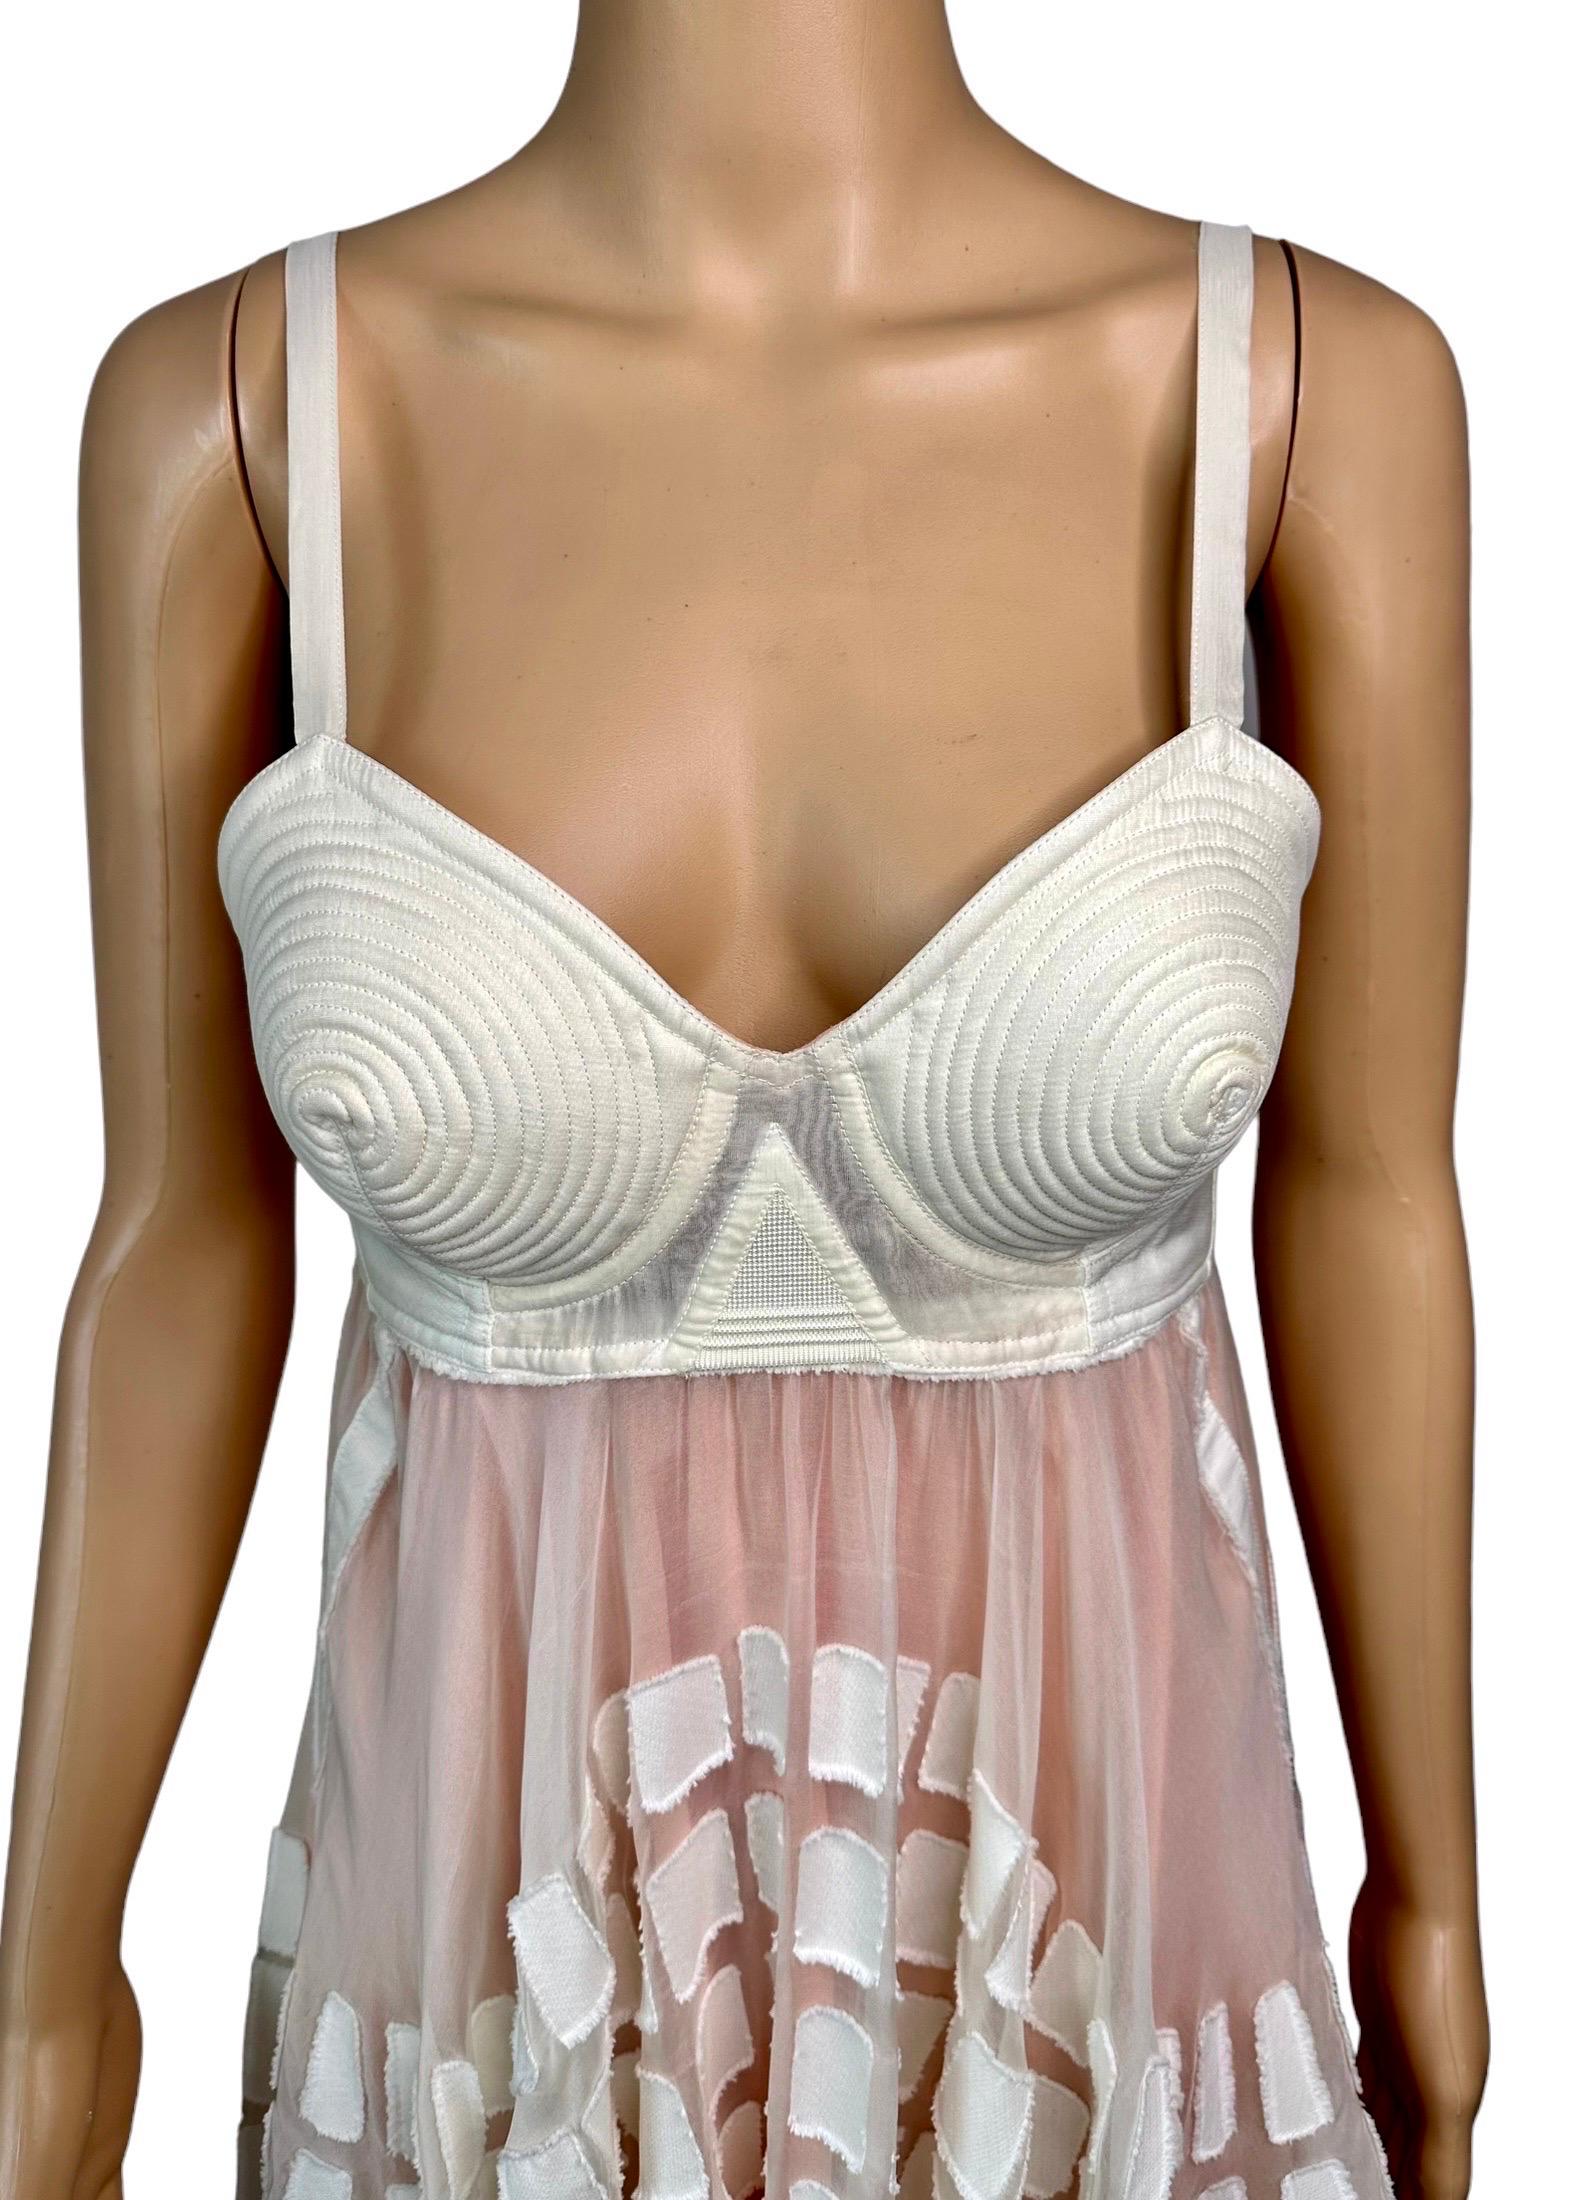 Jean Paul Gaultier S/S 2010 Runway Cone Bra Bustier Cutout Sheer Dress  In Good Condition For Sale In Naples, FL